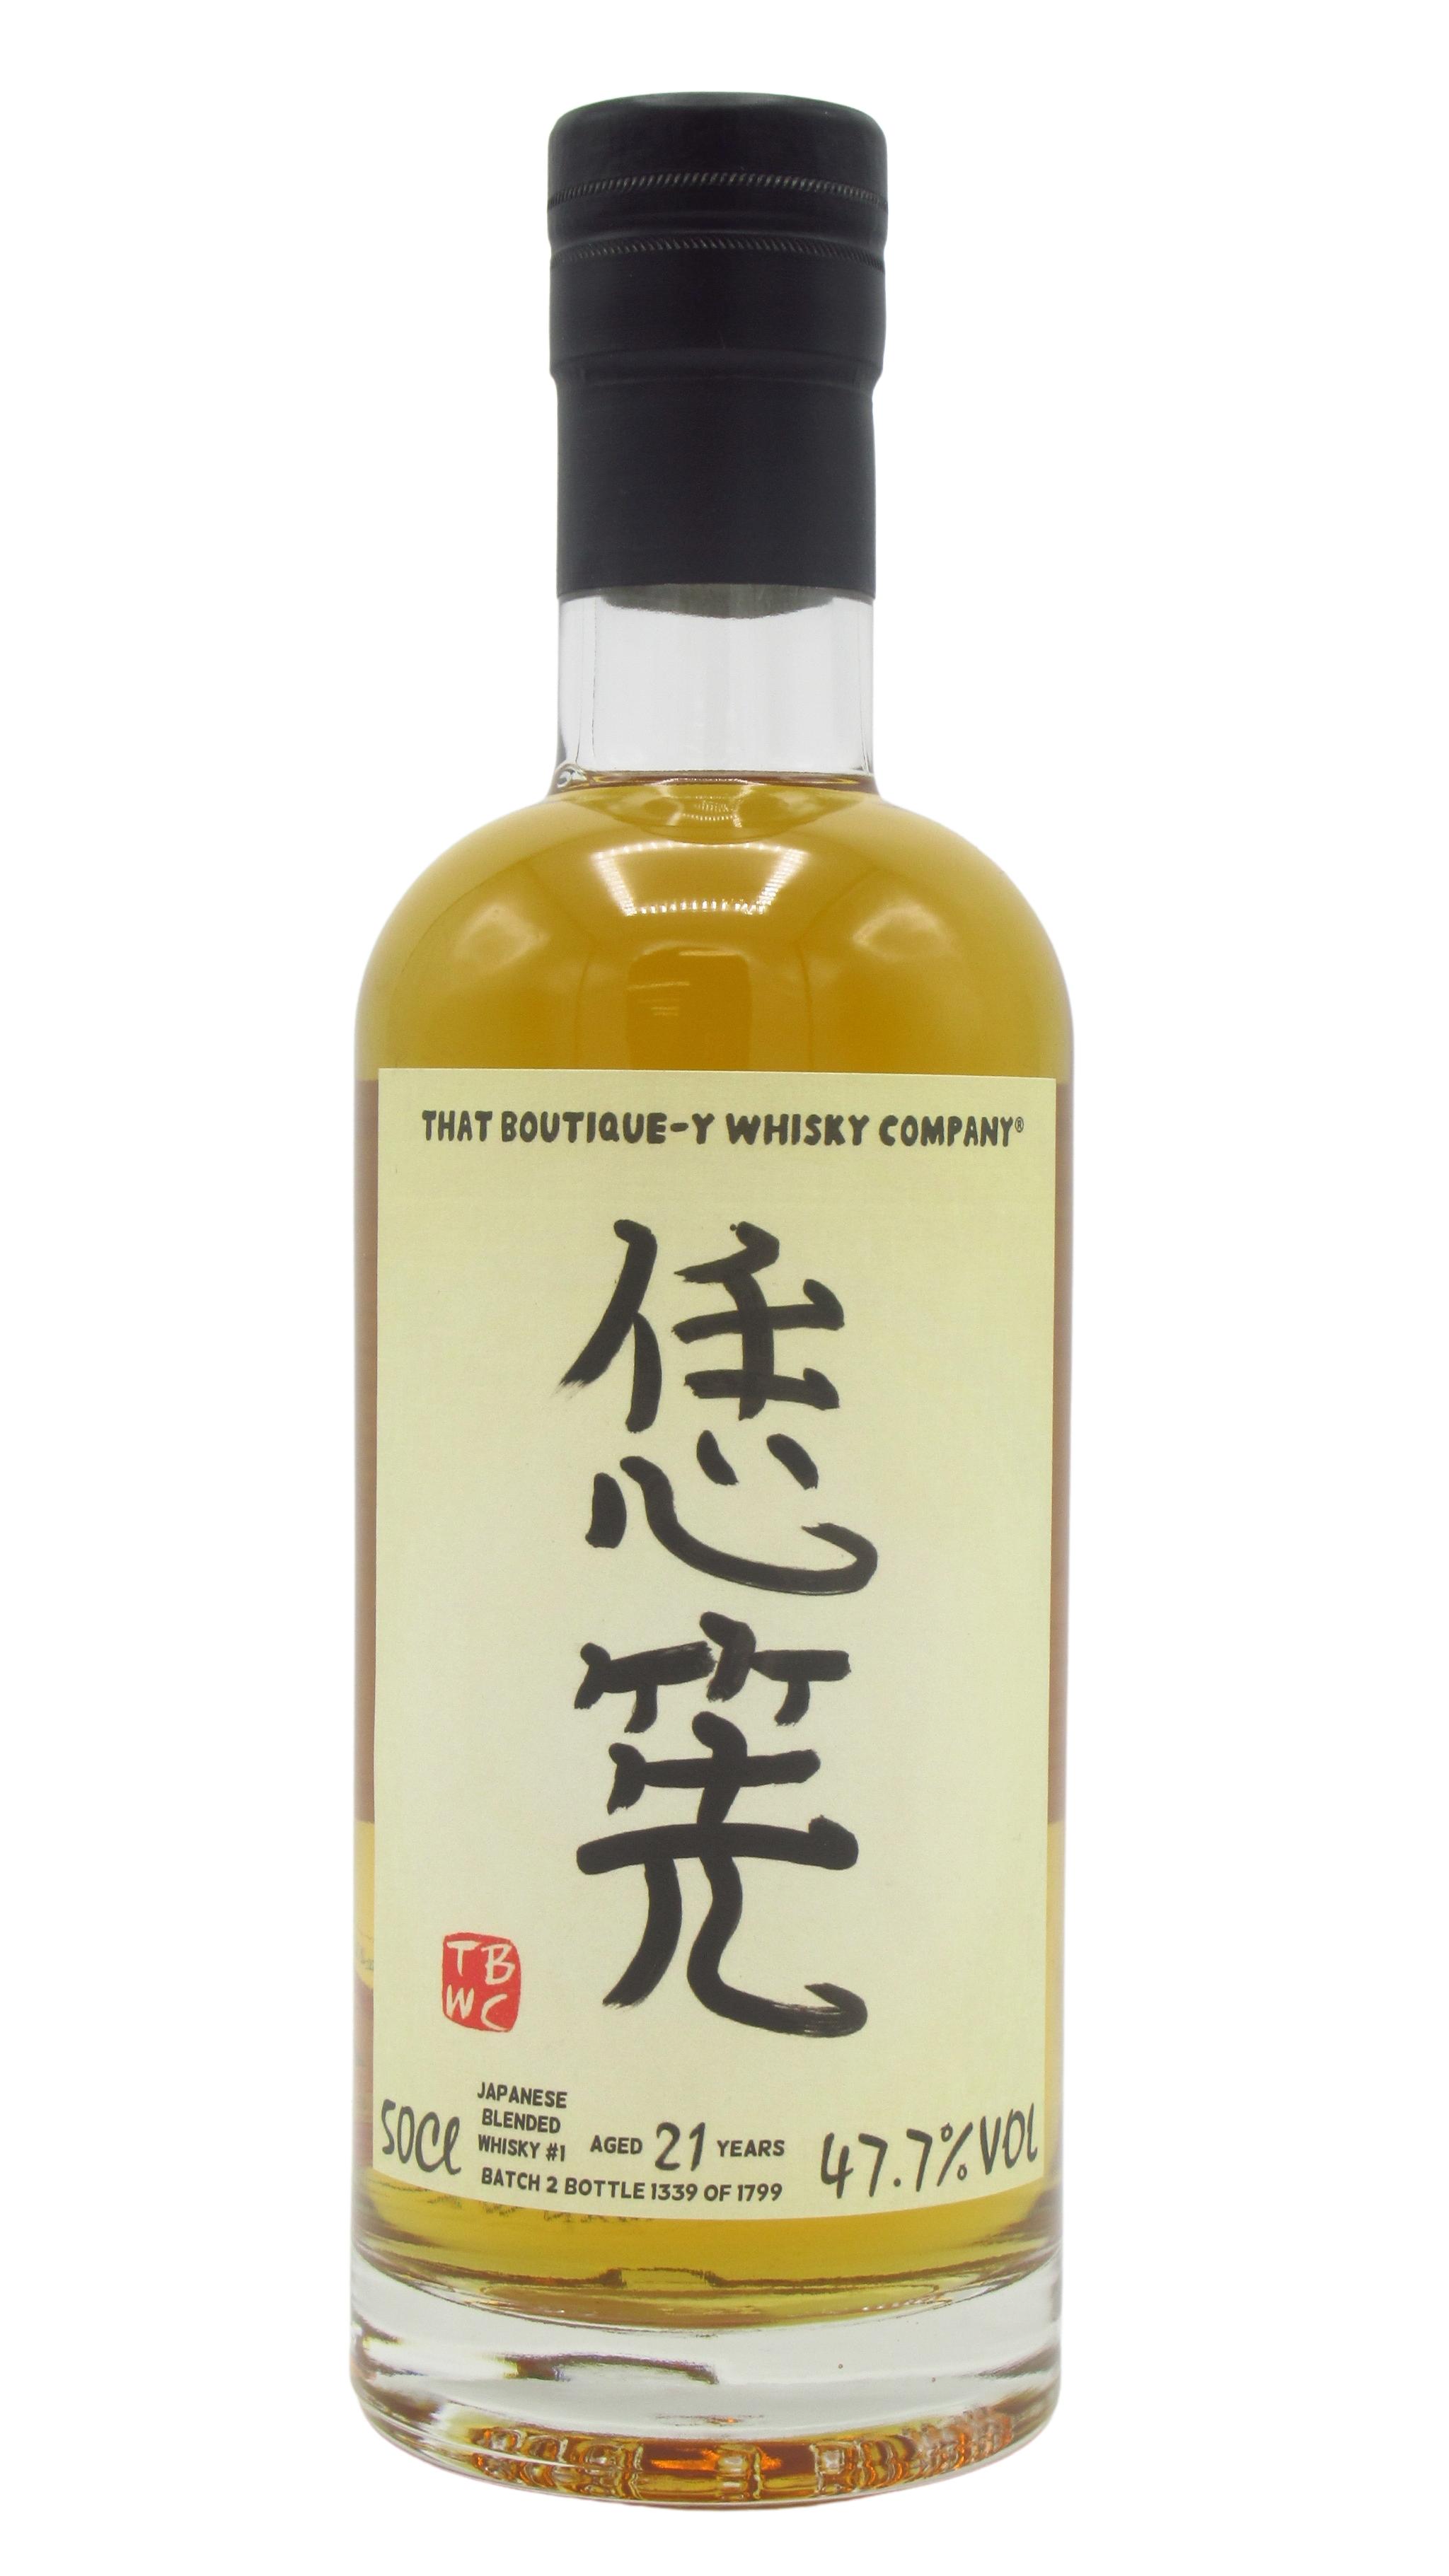 Japanese Blend #1 - That Boutique-y Whisky Company - Batch #2 1997